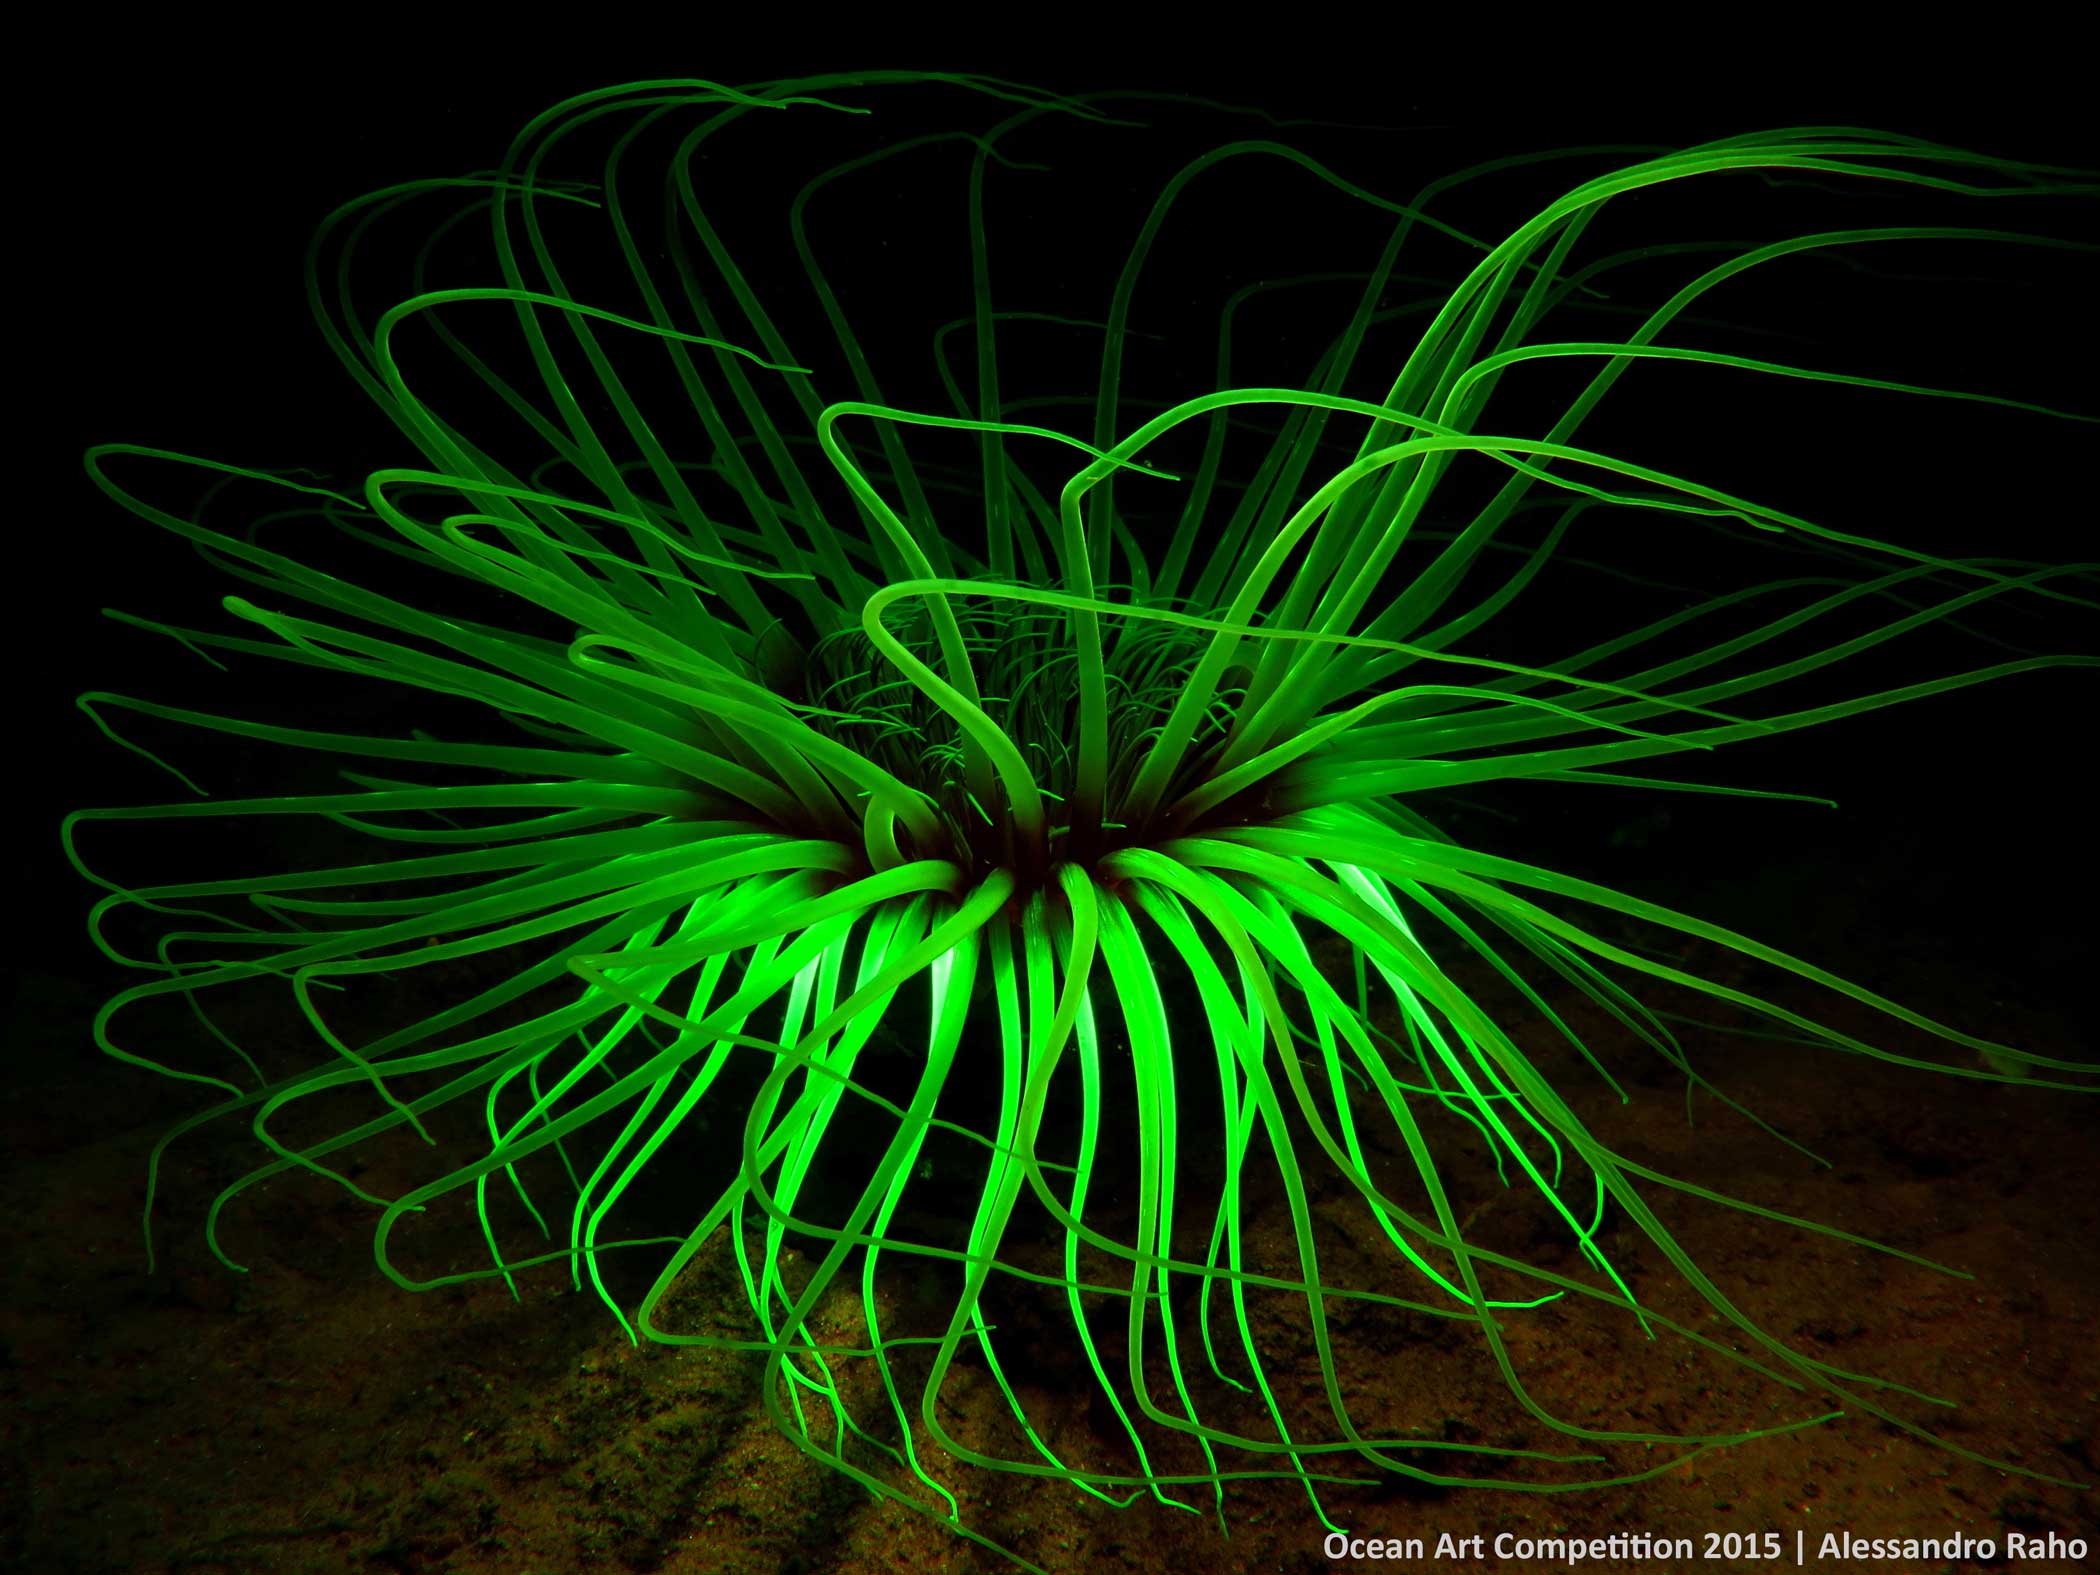 The use of these particular filters makes the fluorescence of some animal species stand out. They are typically used in night diving, but for this photo I used them during the day.